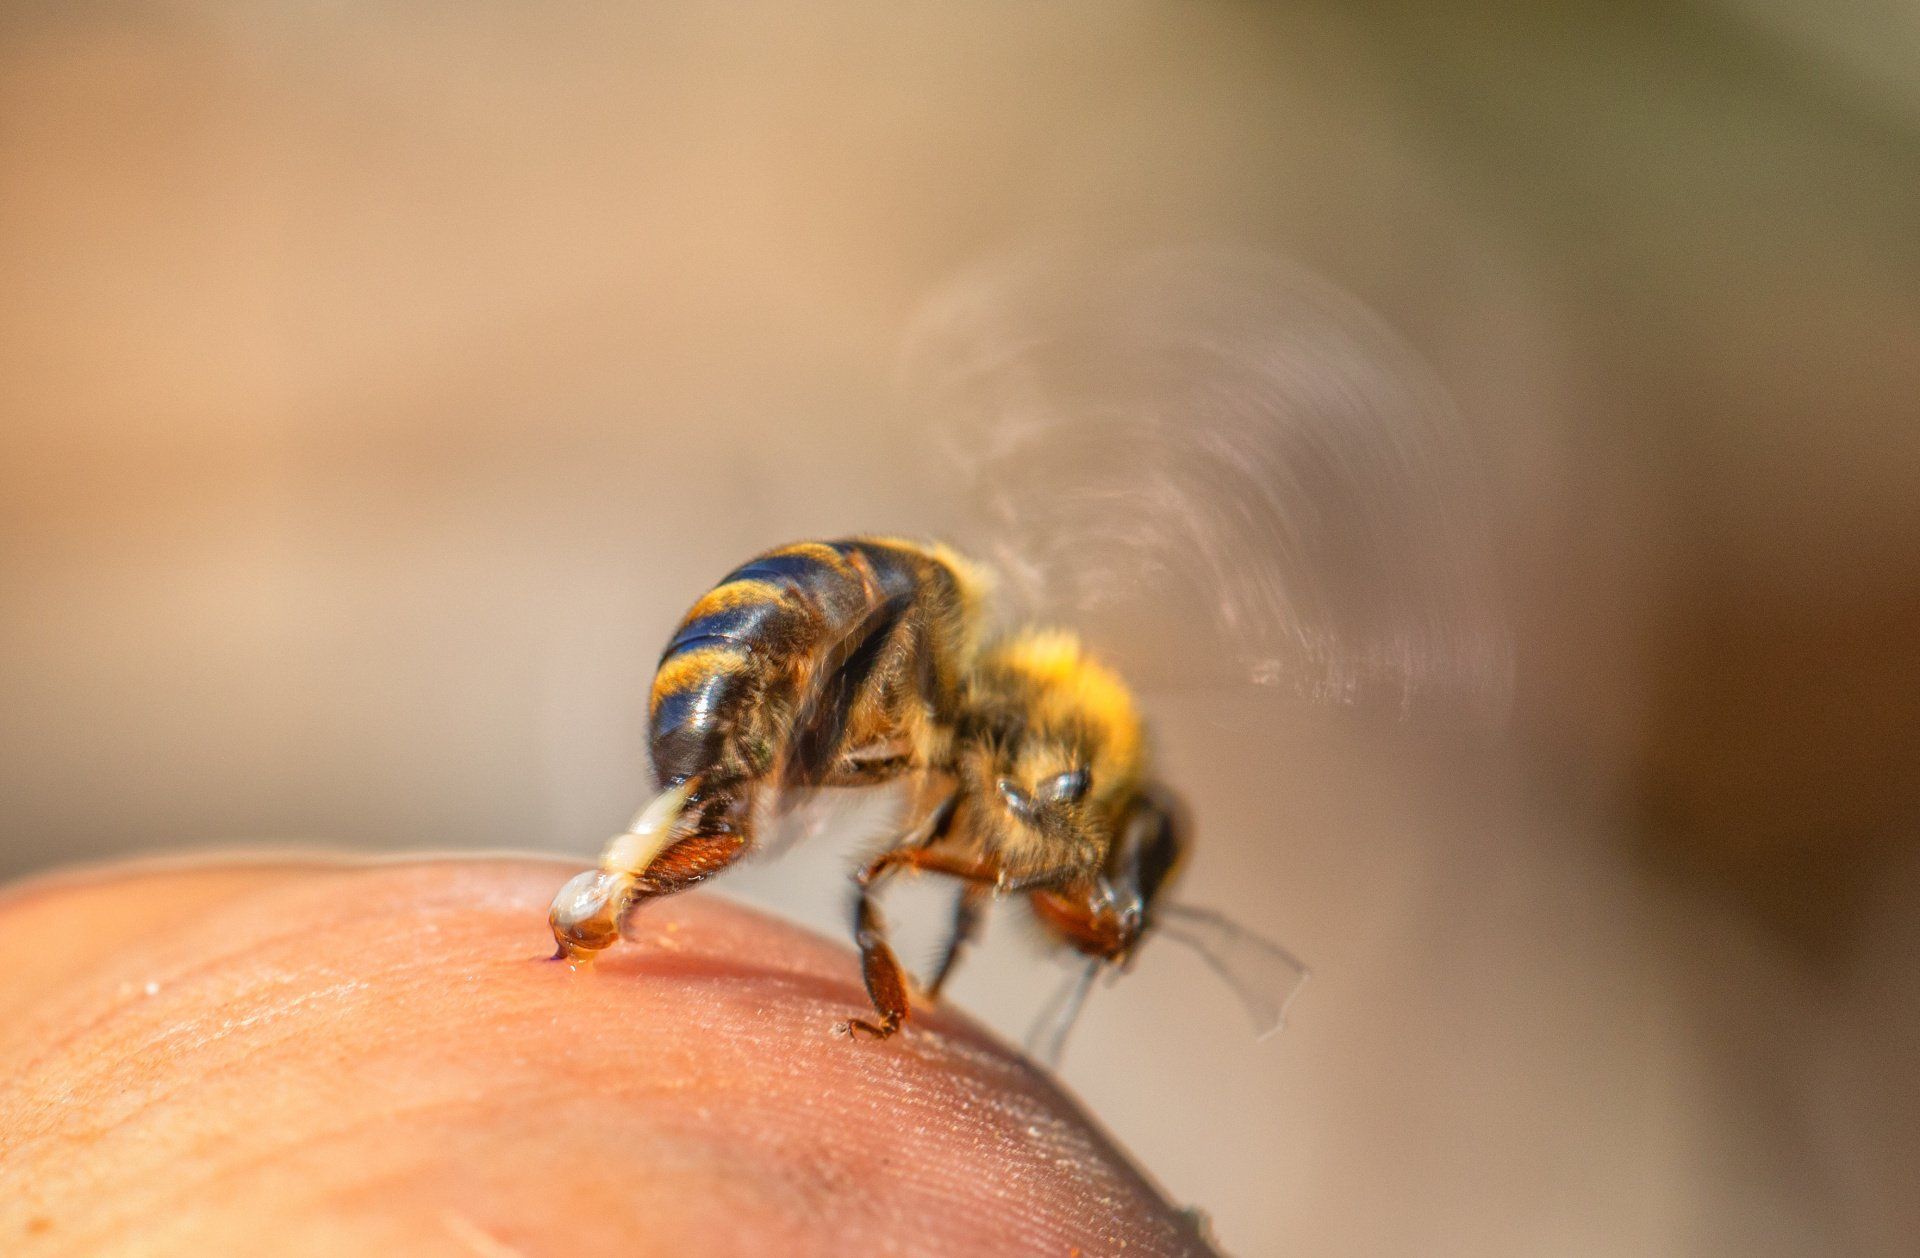 The Honey Bee: Our Friend in Danger